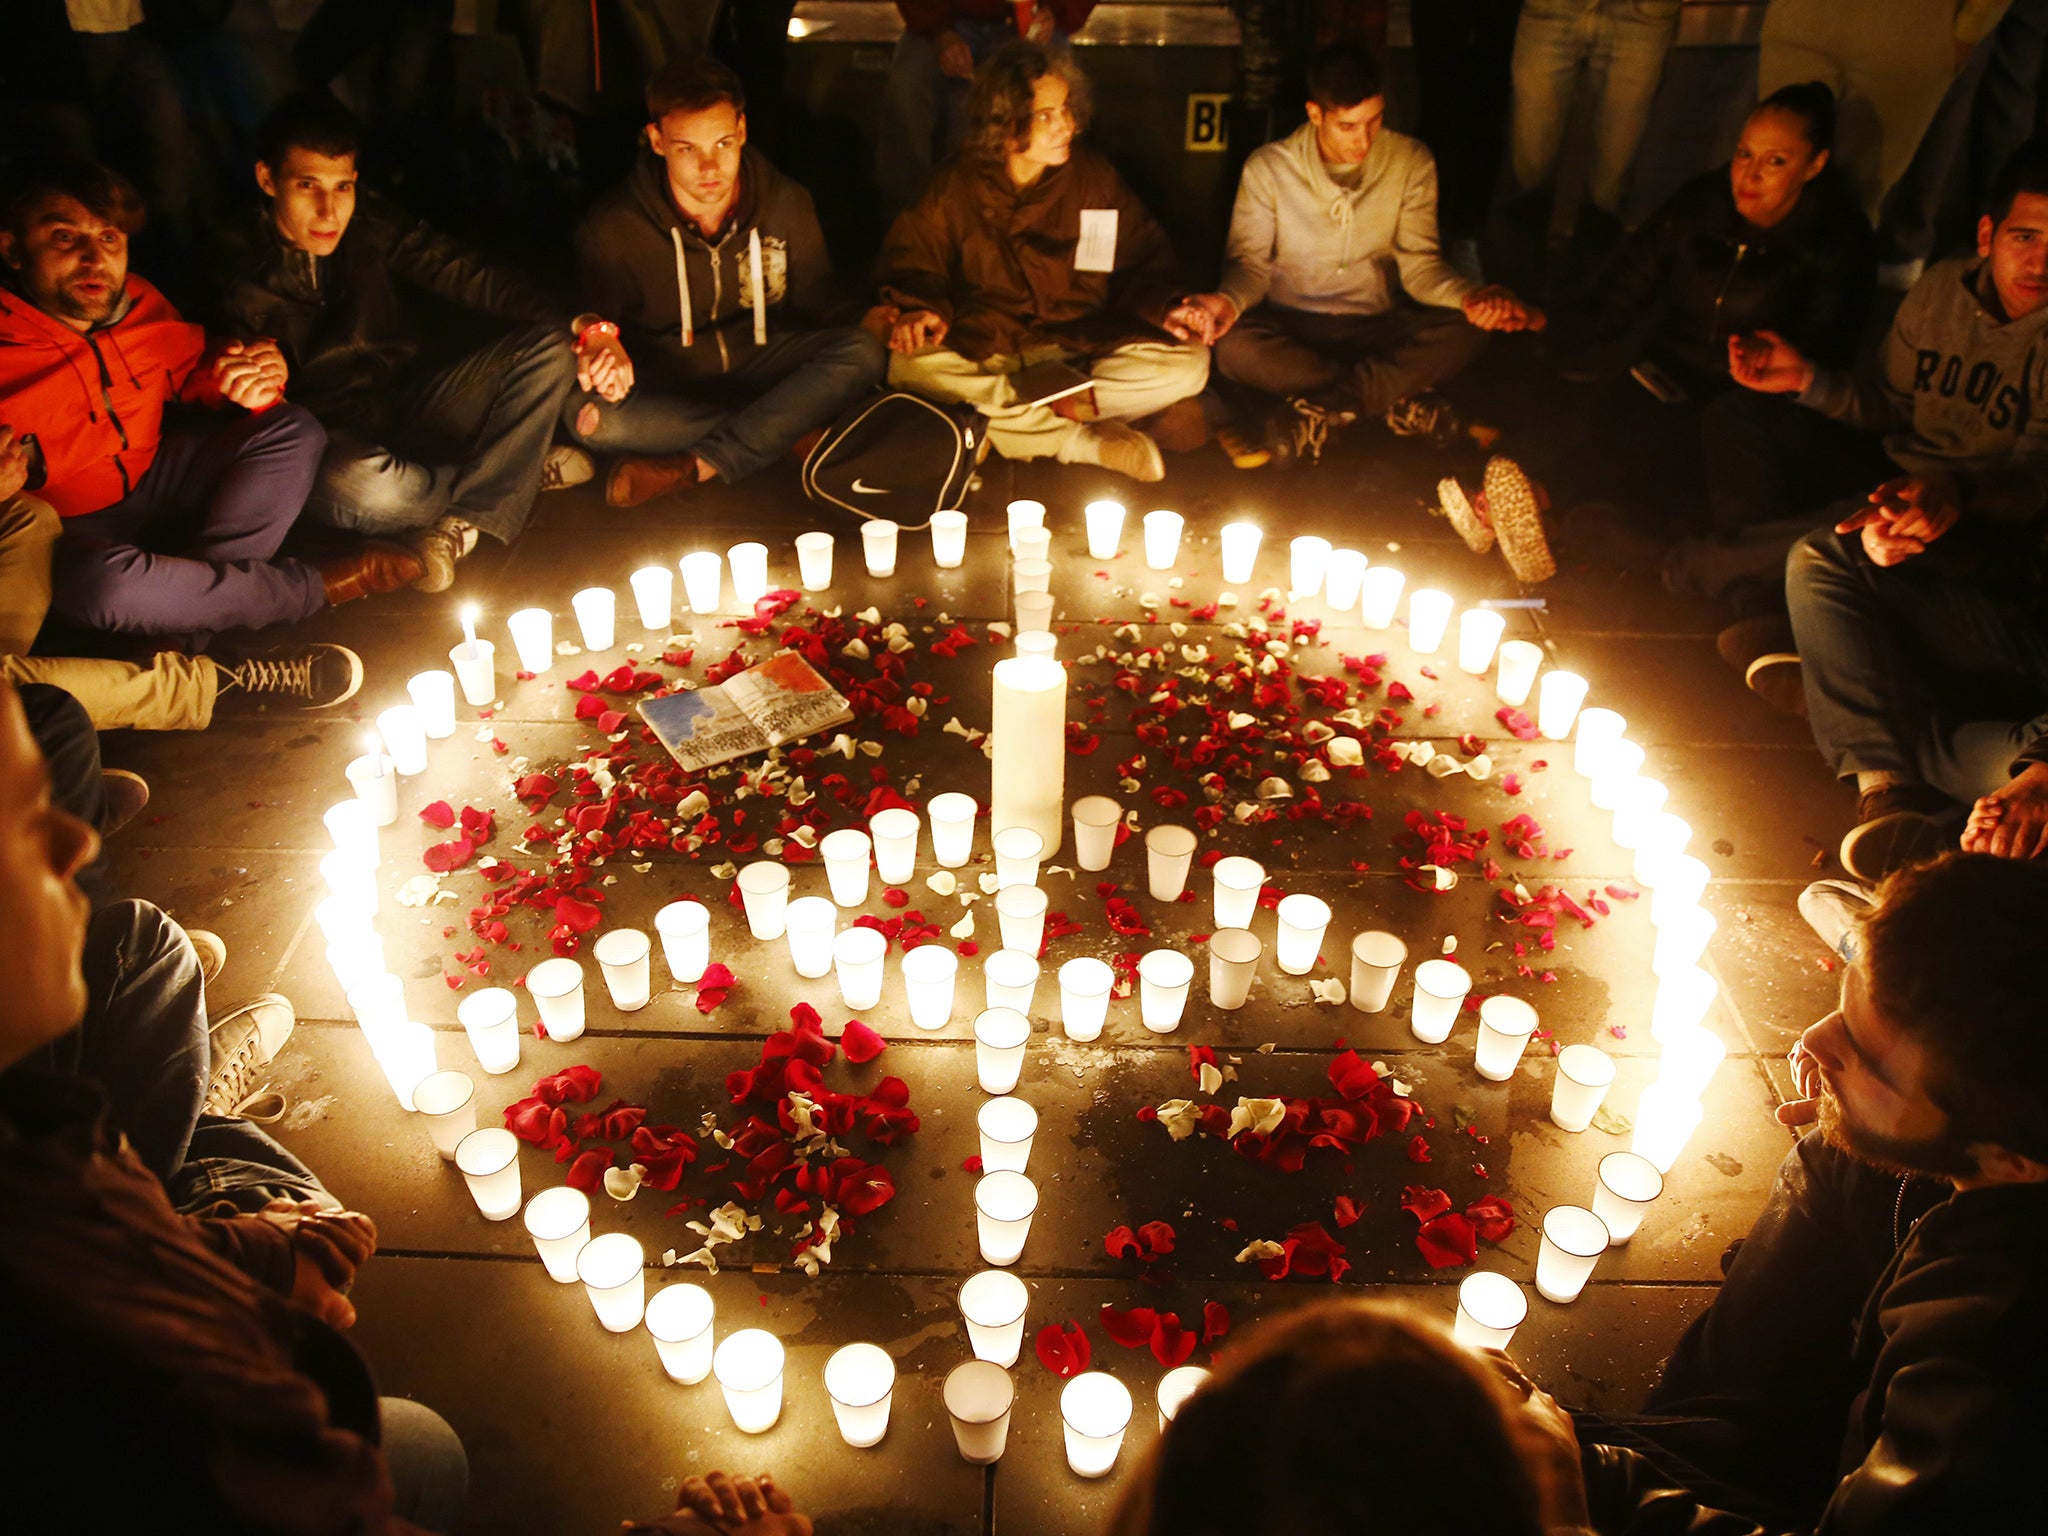 People gathered at Place de la Republique to remember the victims of the attack